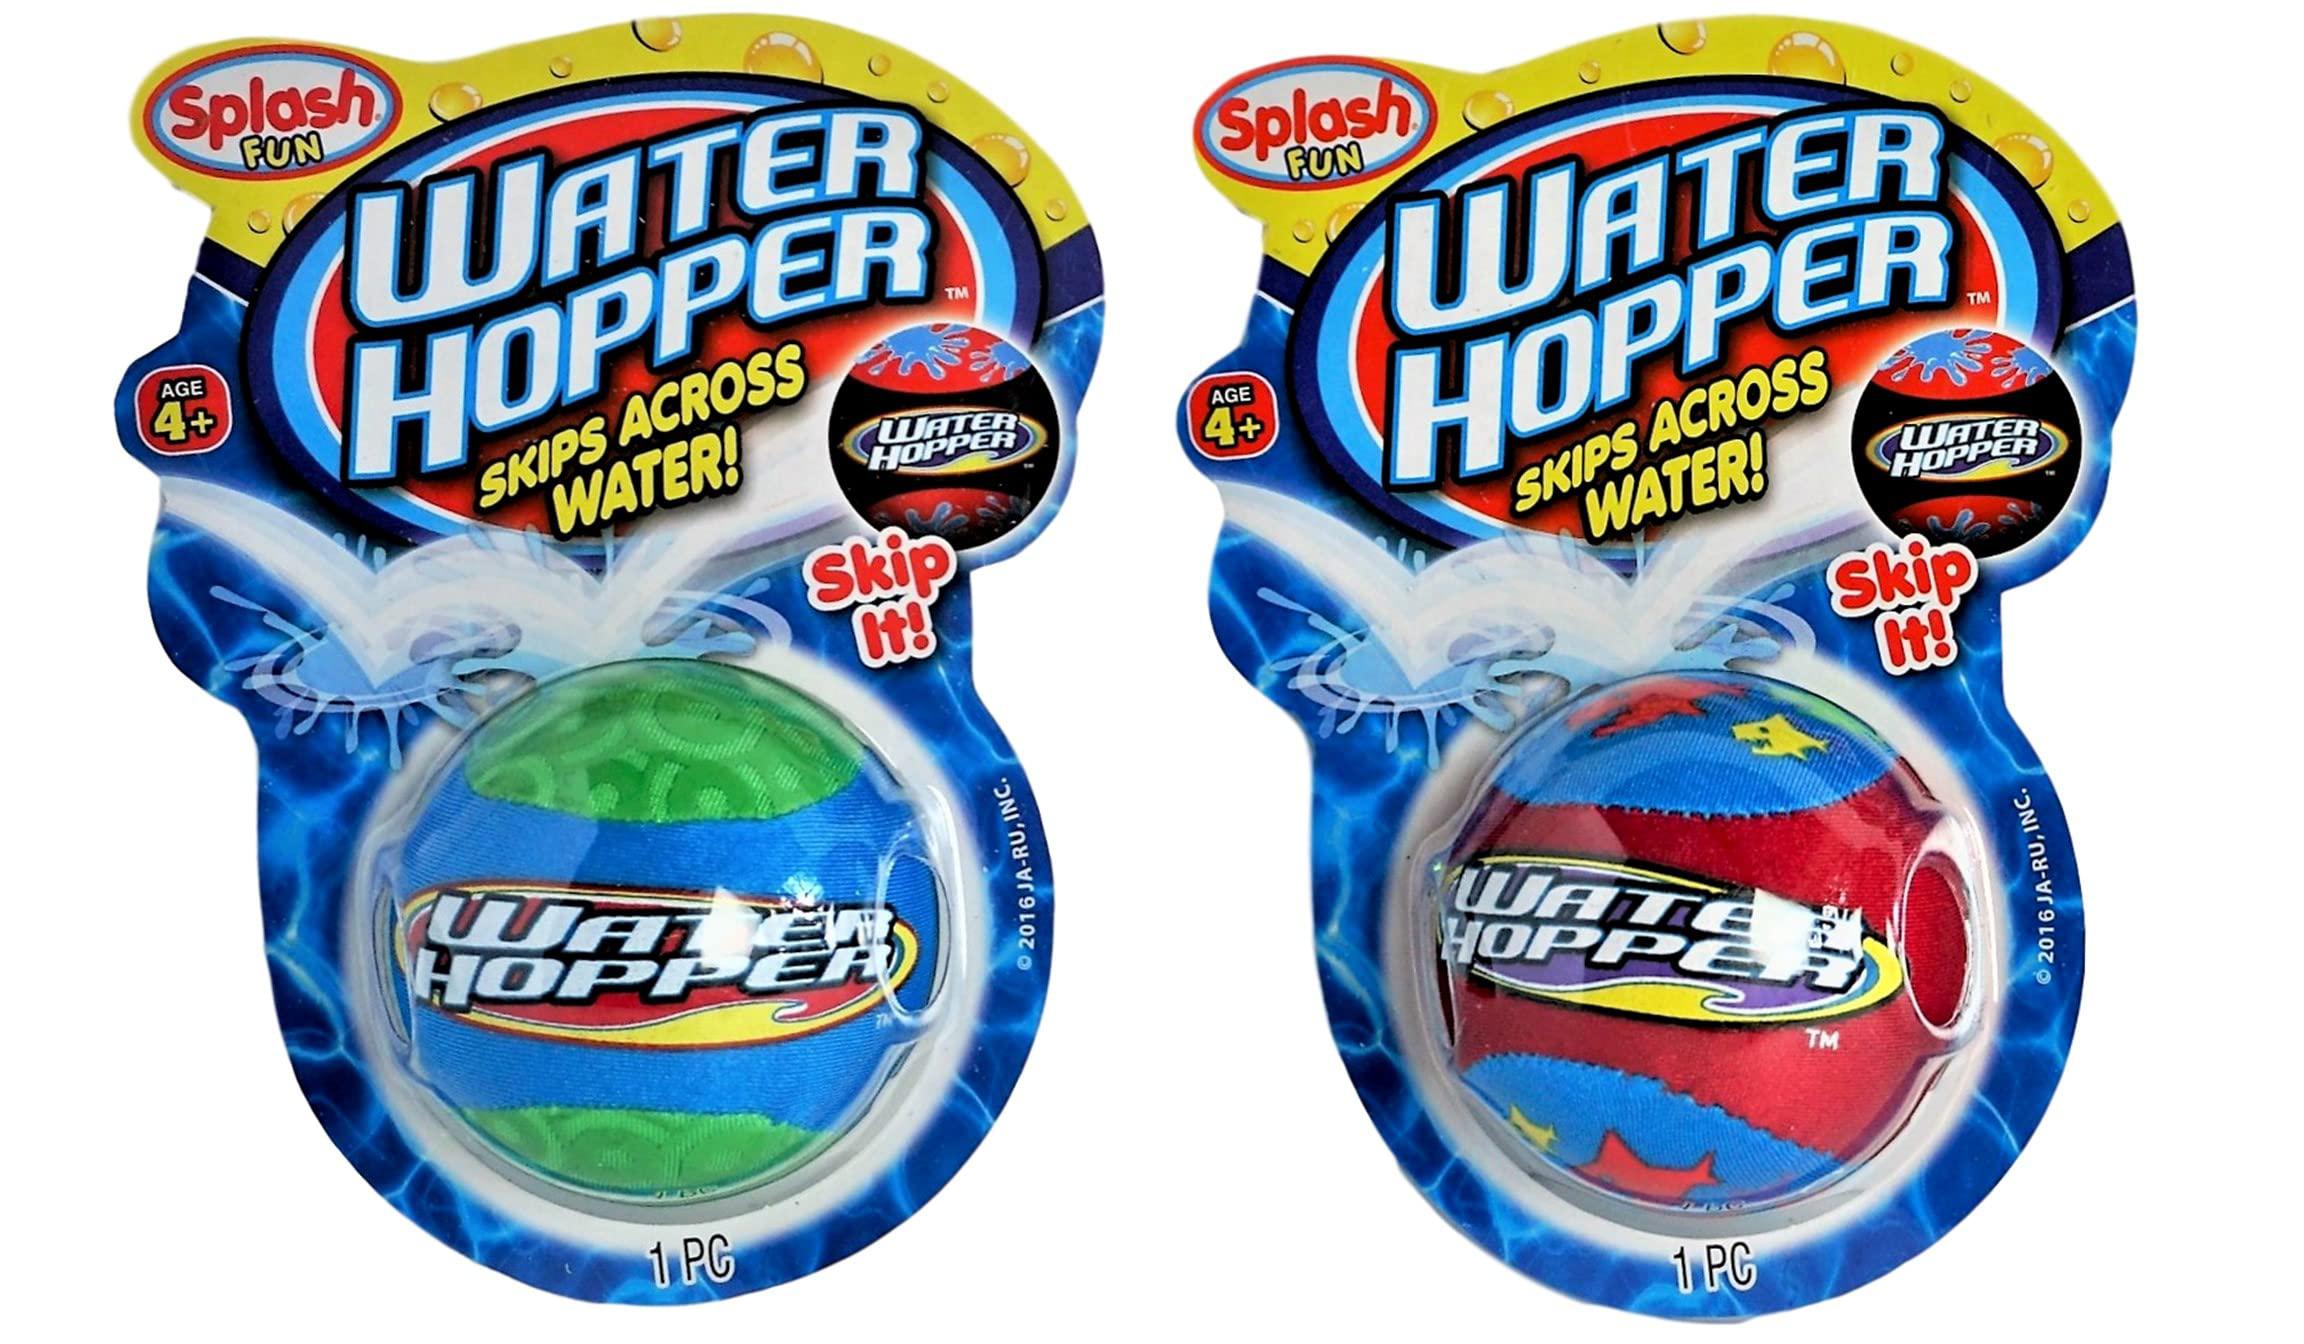 ja-ru water hopper ball toy pack (2 pack assorted) bouncing water skip ball. water balls for pool and for beach game. squishy